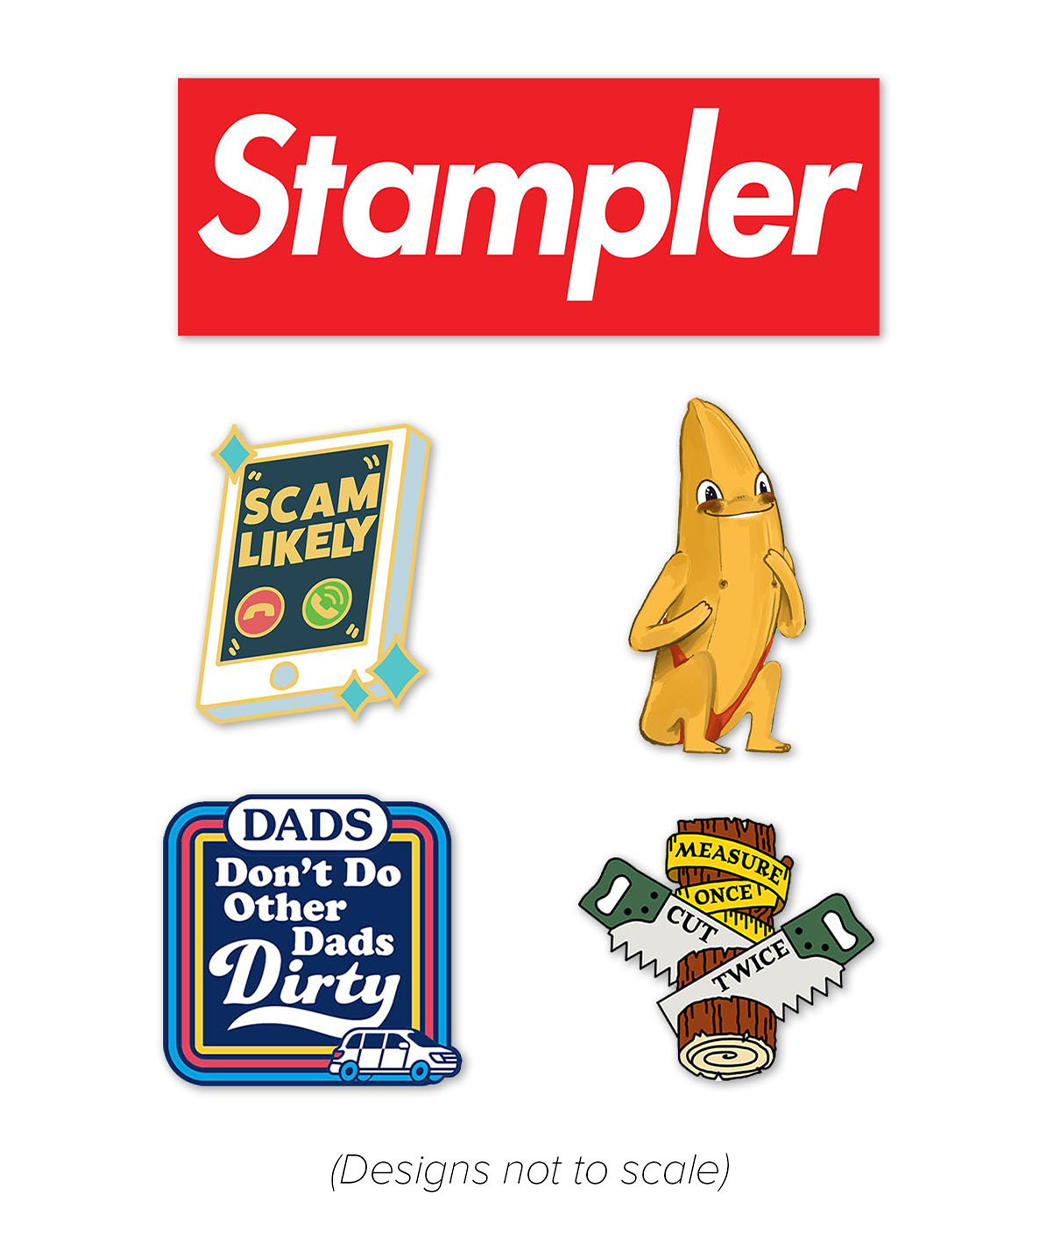 Five stickers. Sticker 1: Red rectangle with the word "Stampler" written on it in white. Sticker 2: An illustrated unpeeled banana smiling. Sticker 3: A log being cut that says "Measure Once, CUT TWICE". Sticker 4: A blue square with groovy border that says "DADS Don't Do Other Dads Dirty" and a white Honda Odyssey in the lower right corner. Sticker 5: An illustrated phone ringing and the caller ID says SCAM LIKELY in yellow.